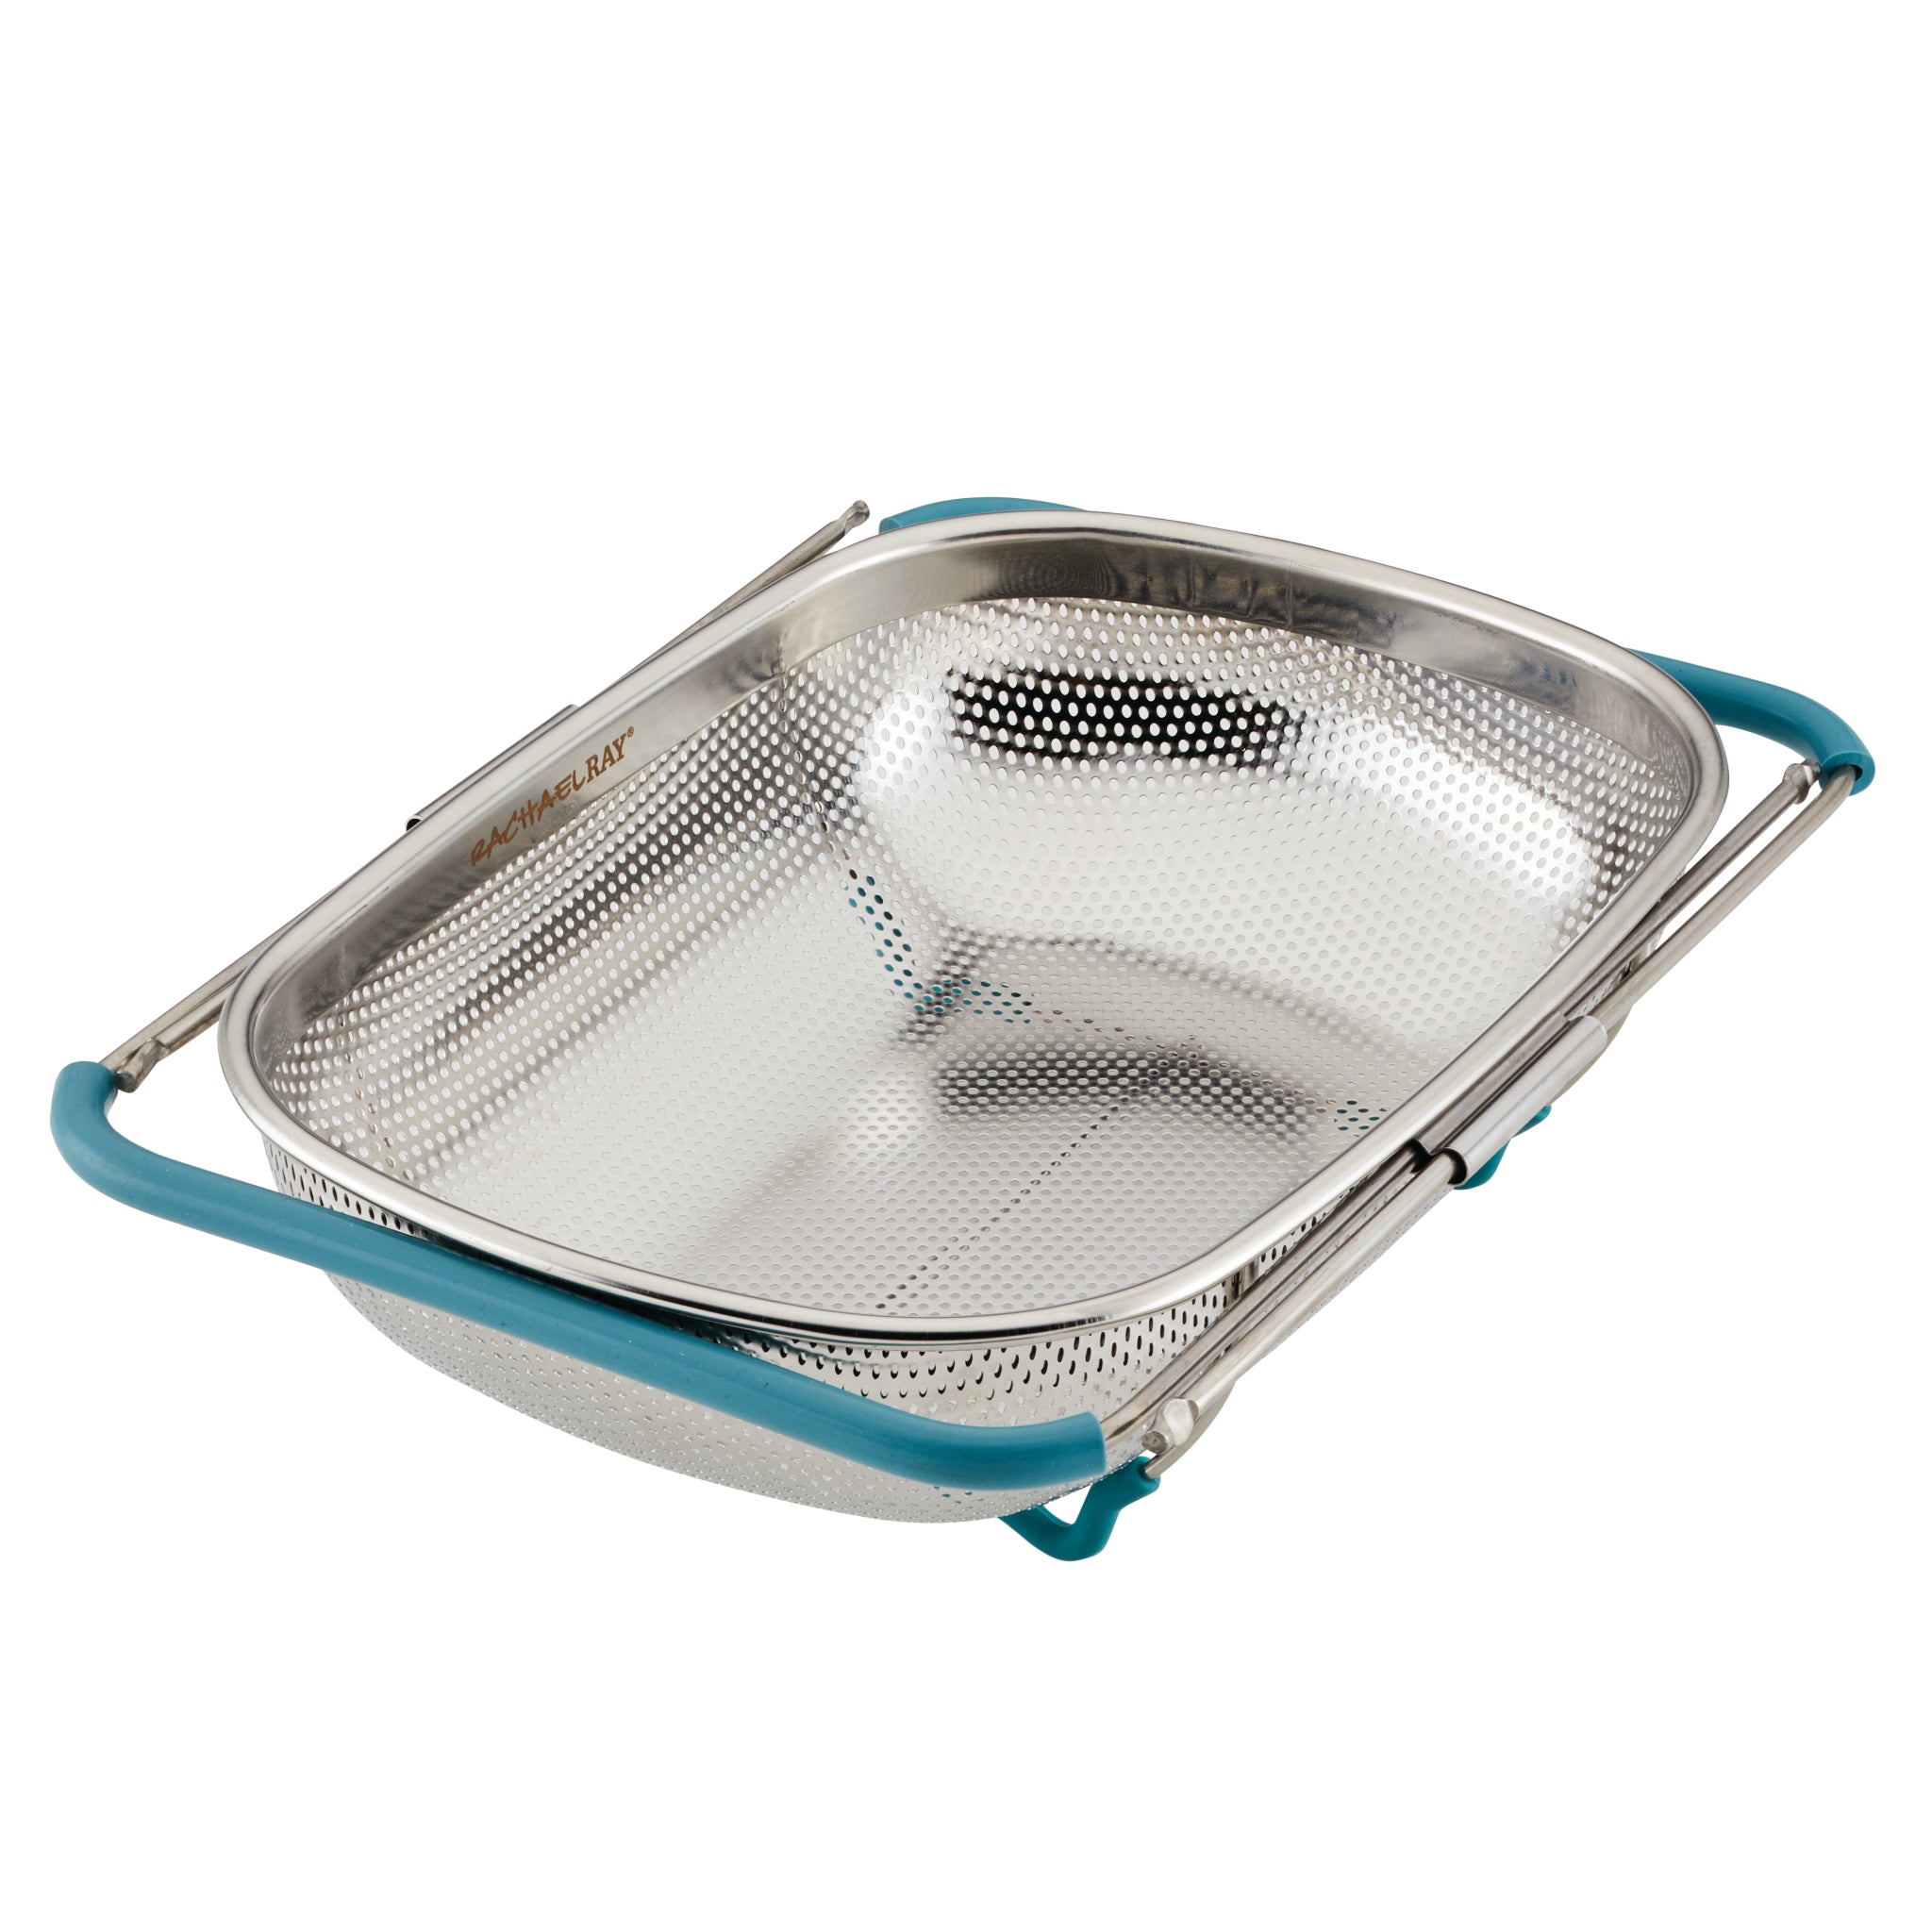 STYLISH Adjustable Over the Sink Stainless Steel Dish or Vegetable